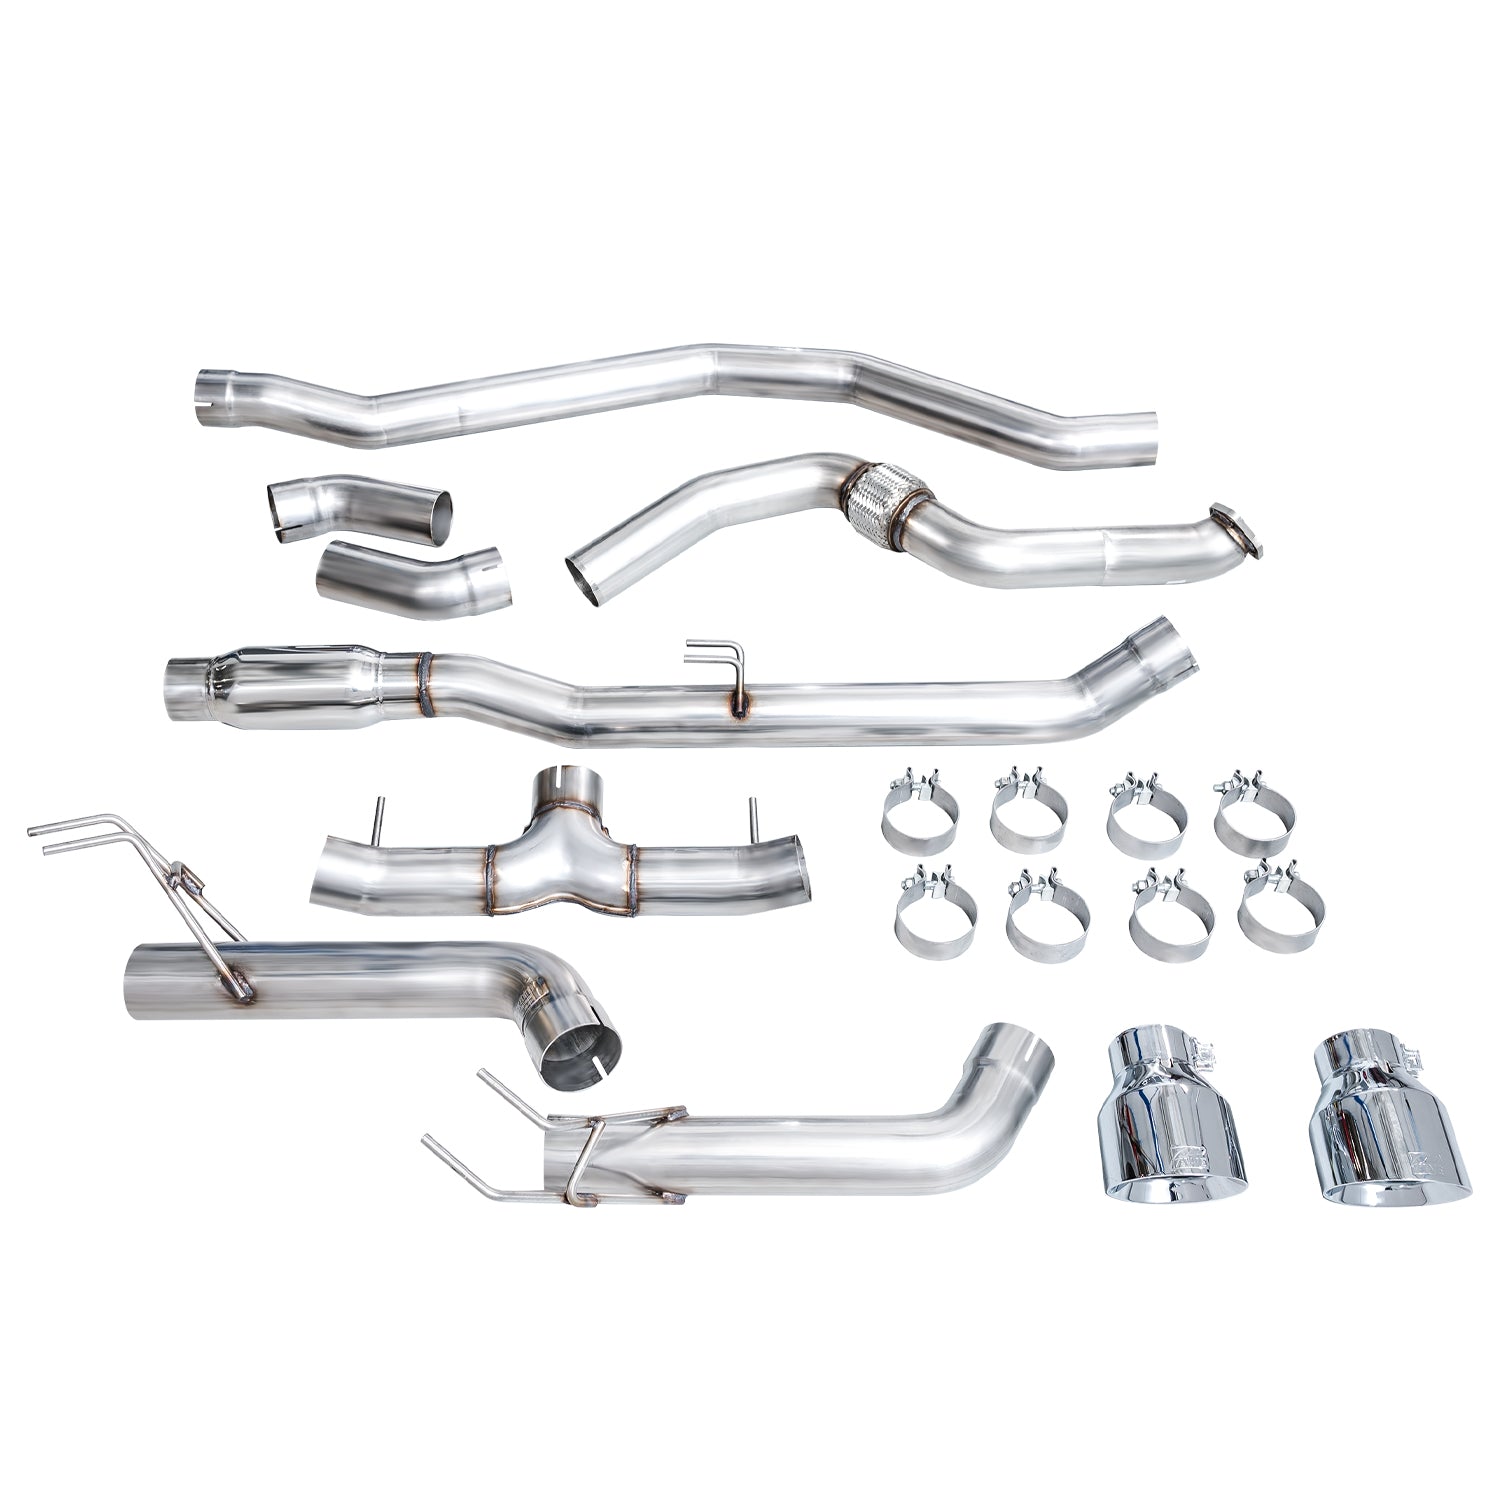 AWE Exhaust Suite for FE1 Civic Si / DE4 Acura Integra